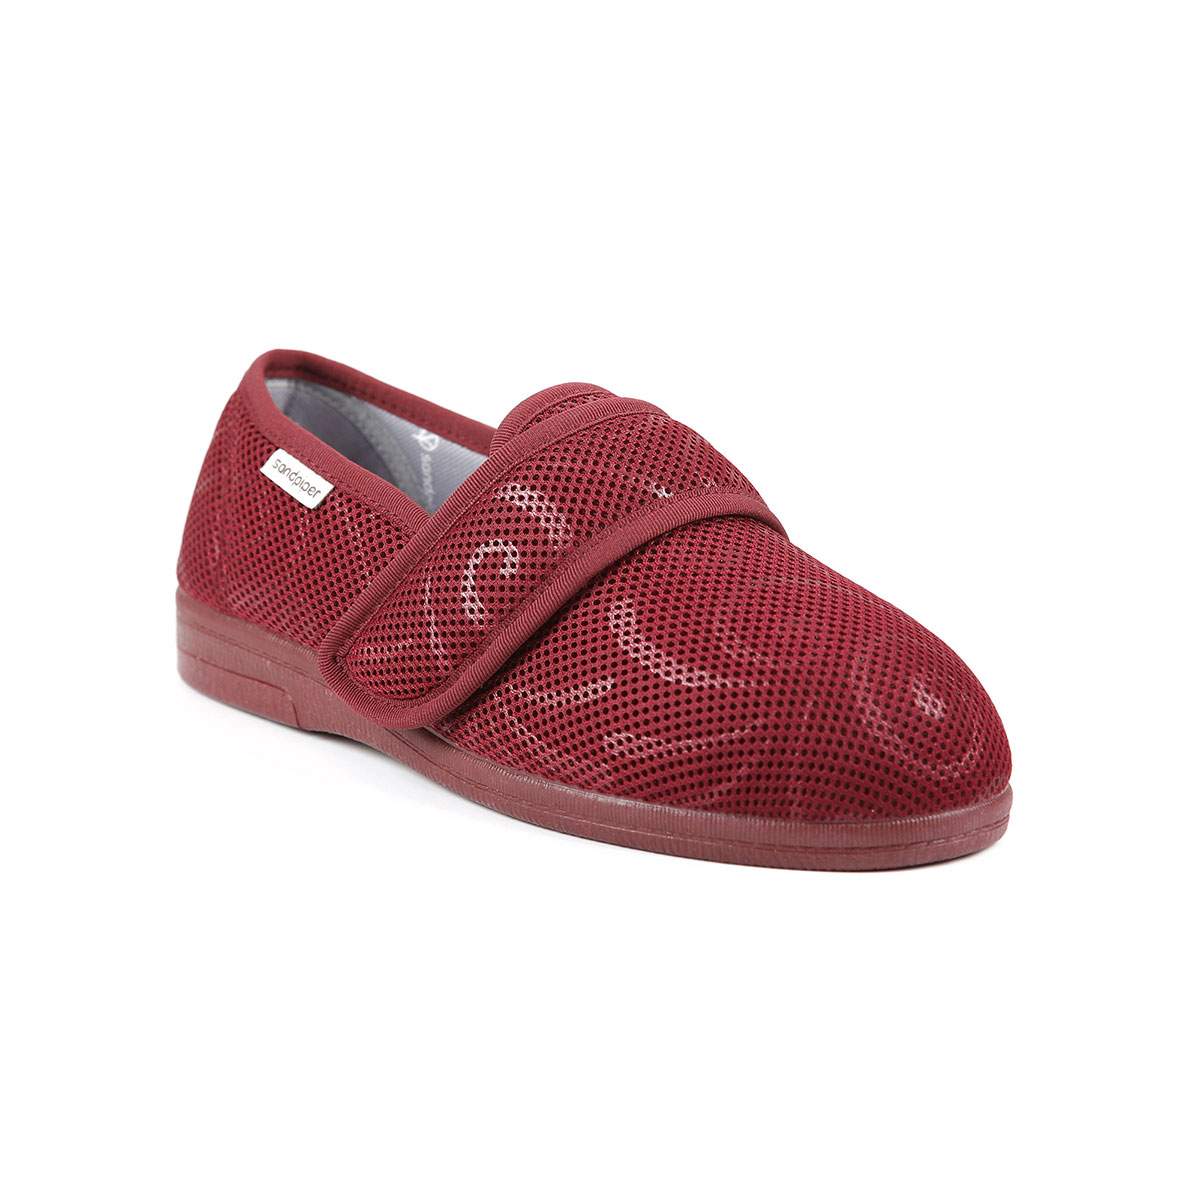 Red wine colour with swirl pattern Sophie slipper